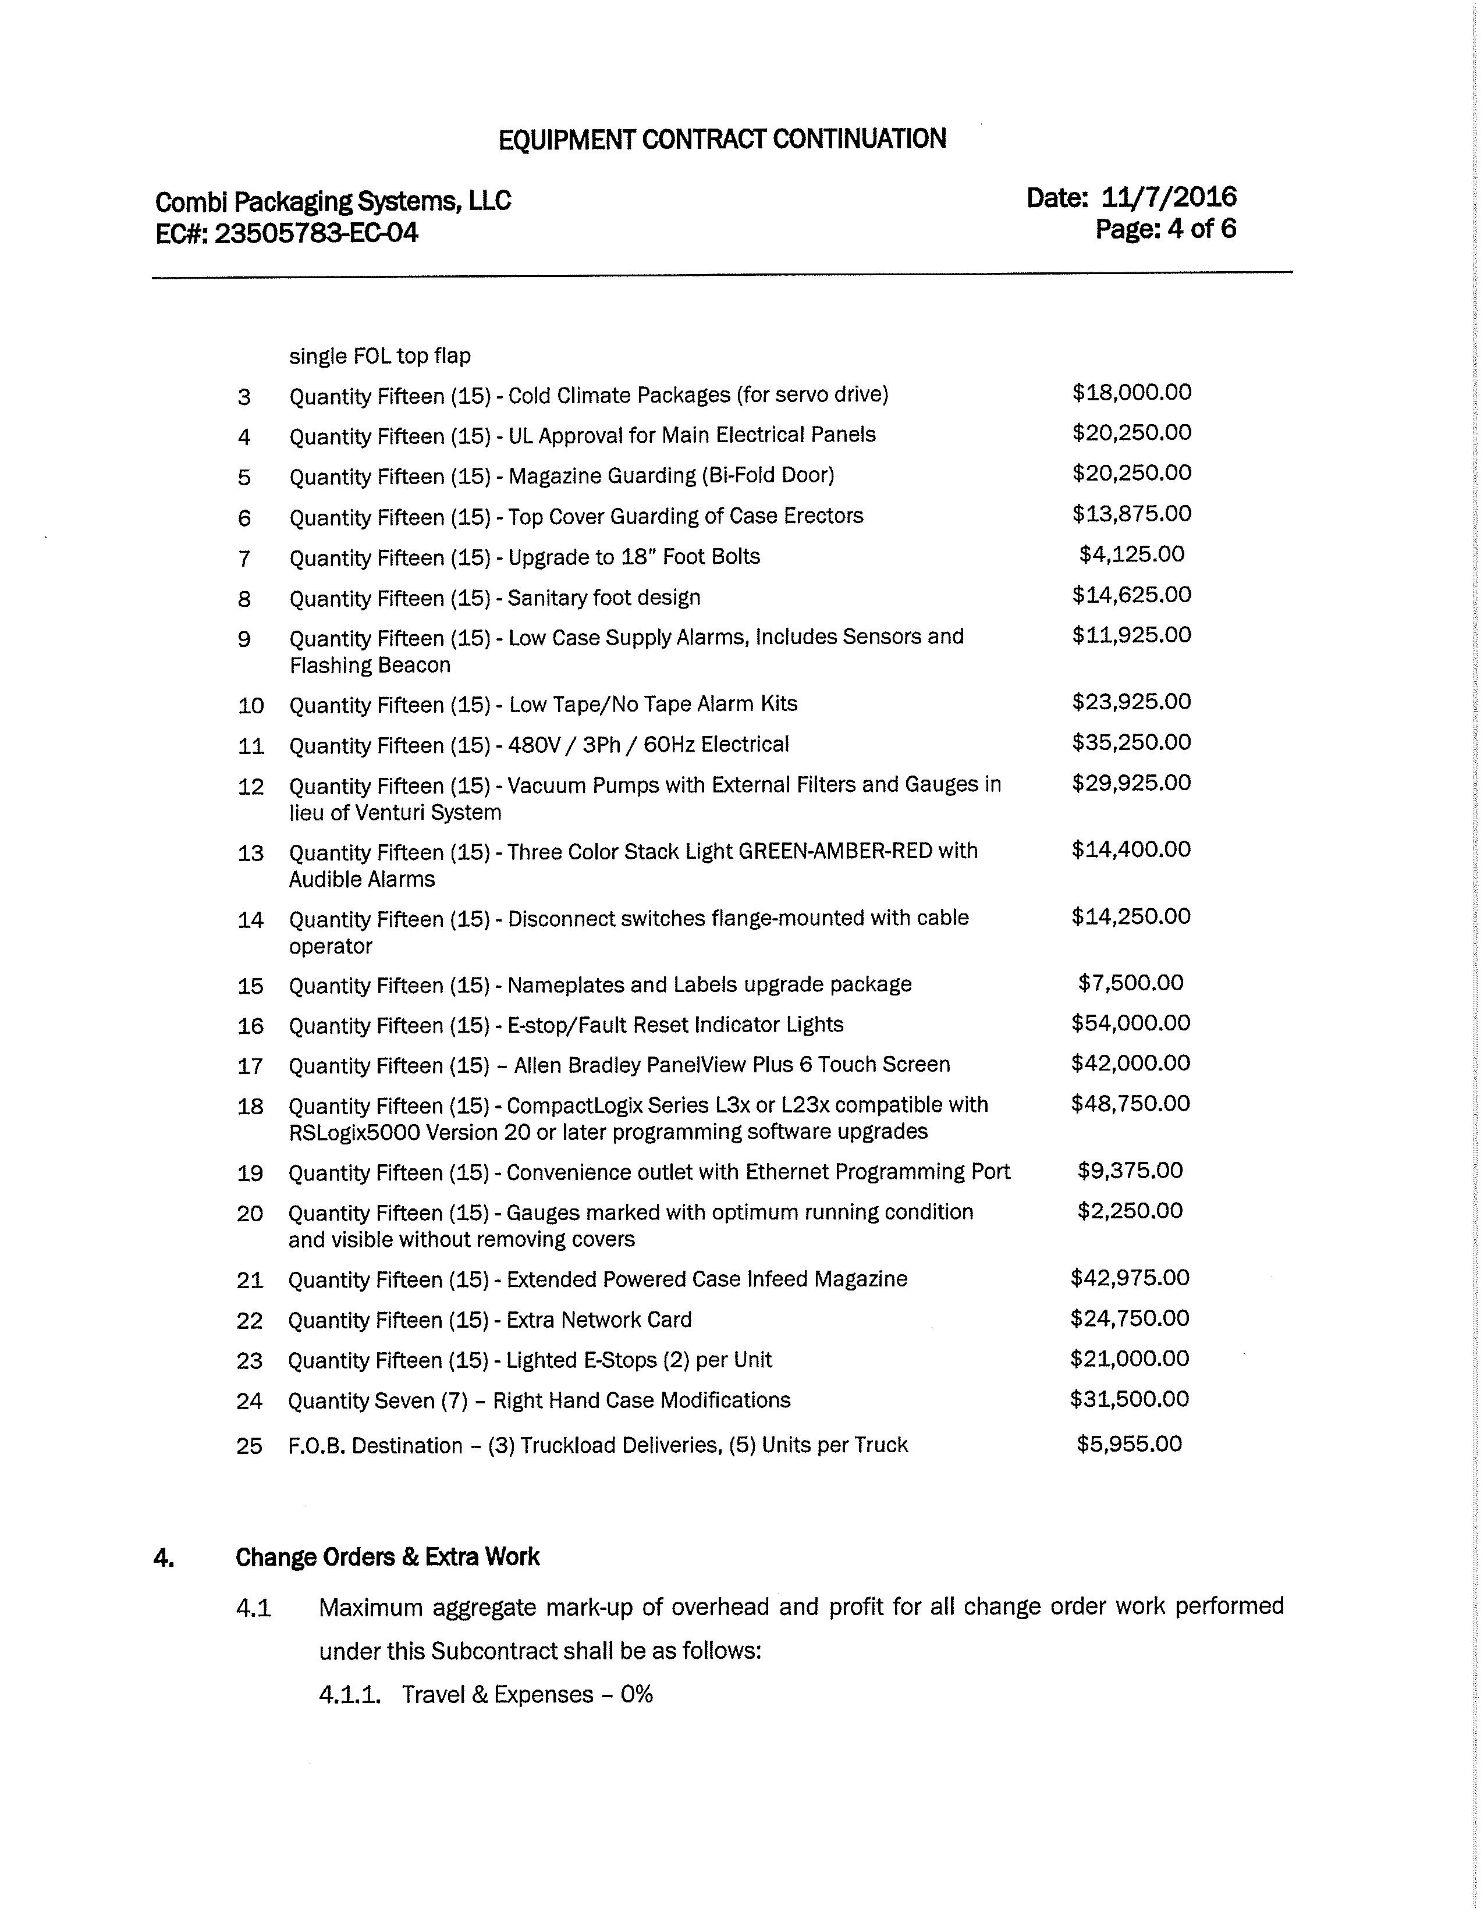 ORIGINAL PURCHASE ORDER FOR (15) COMBI CASE ERECTORS AND VIDEO - Image 2 of 2